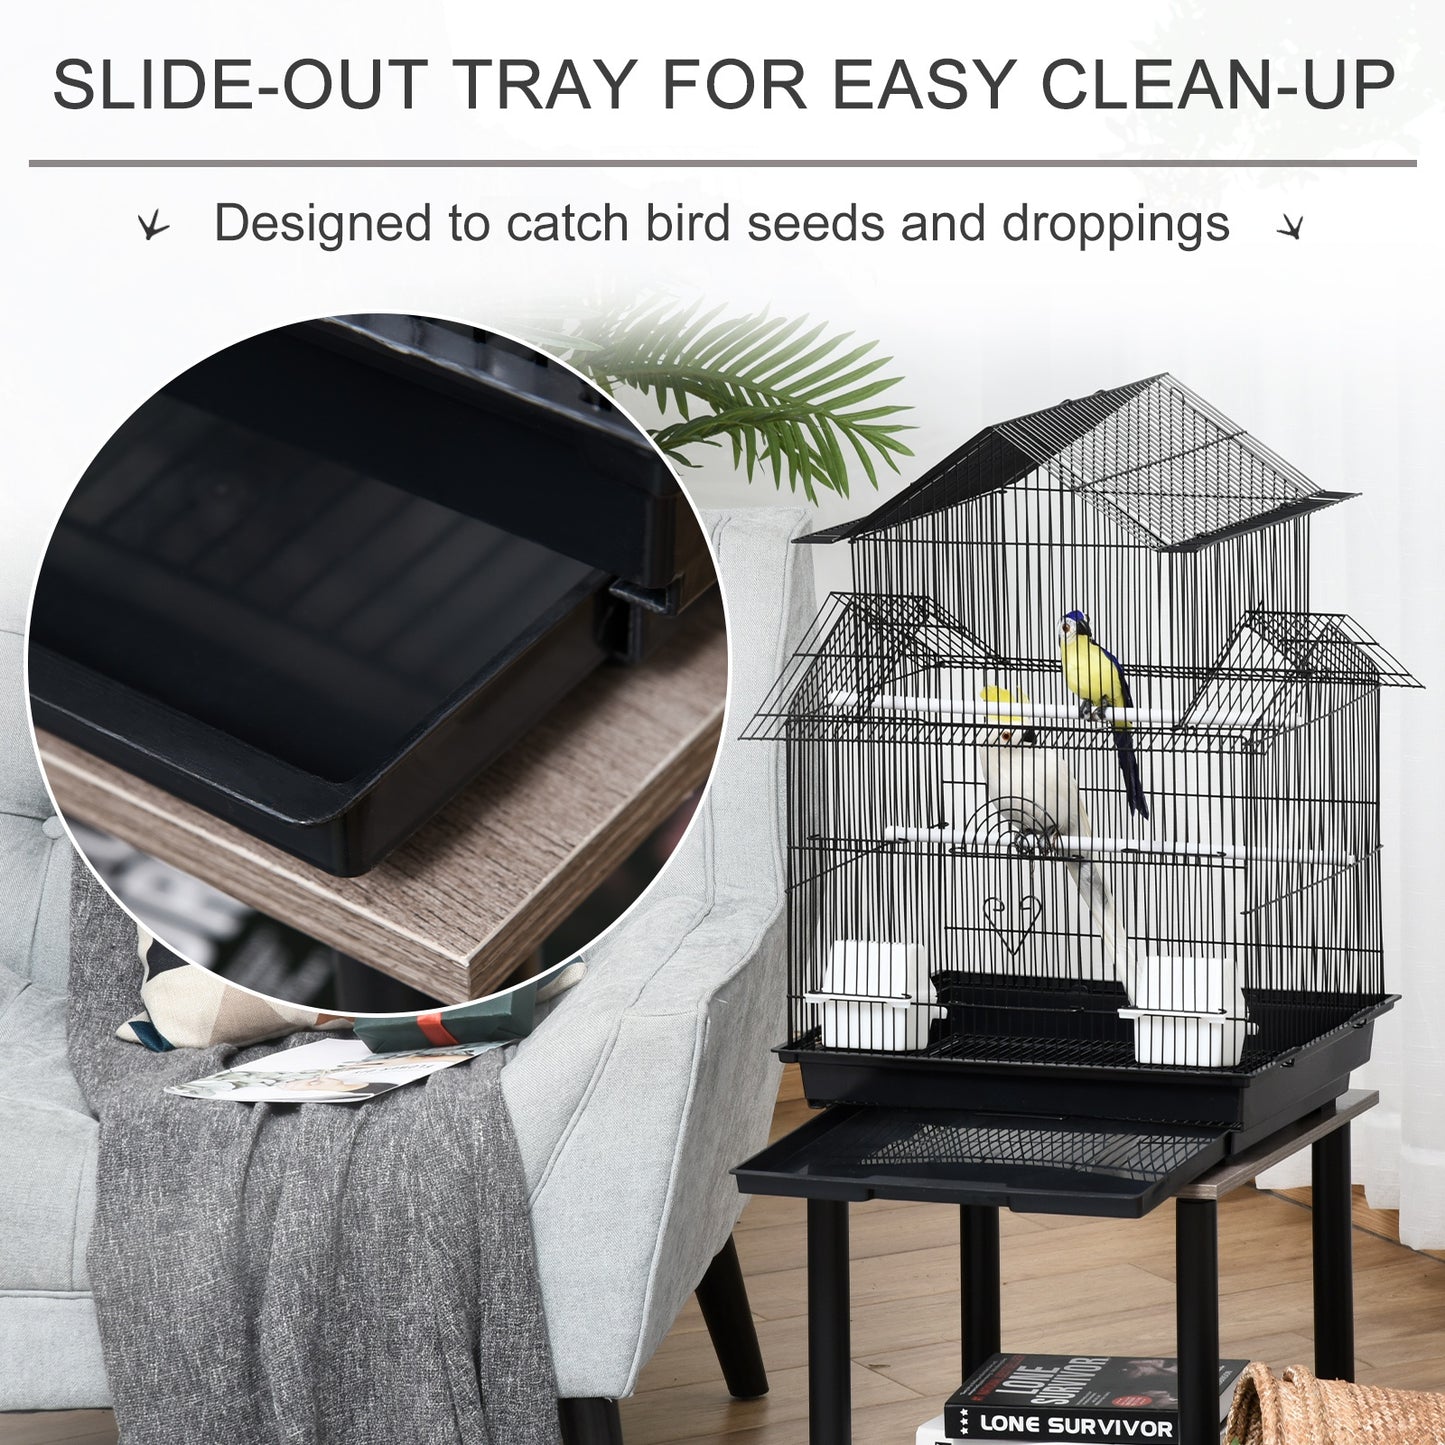 PawHut Metal Bird Cage w/ Plastic Perch Food Container Handle Small 51 x 40 x 67cm Black